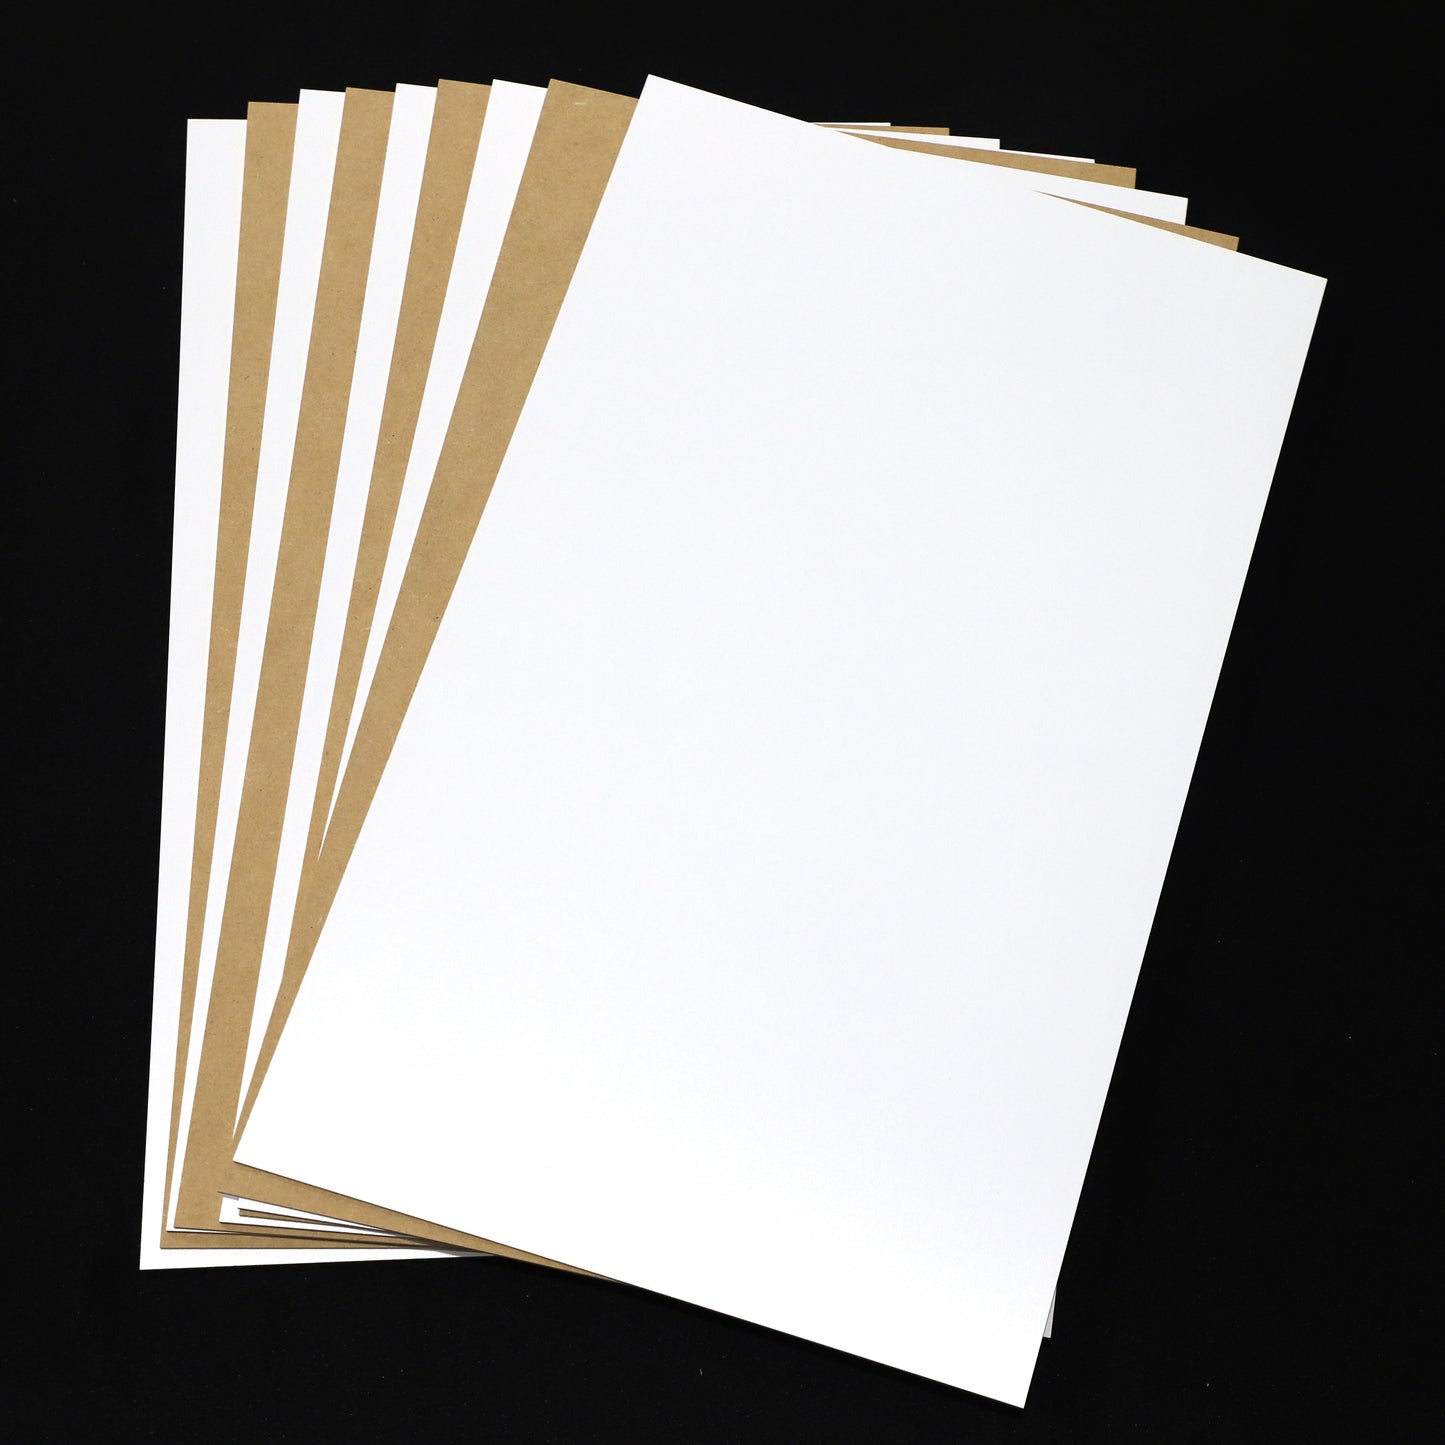 LOCAL PICK UP ONLY - 1/8" Premium White Single-Sided MDF Draft Board 23.75" x 34.75"